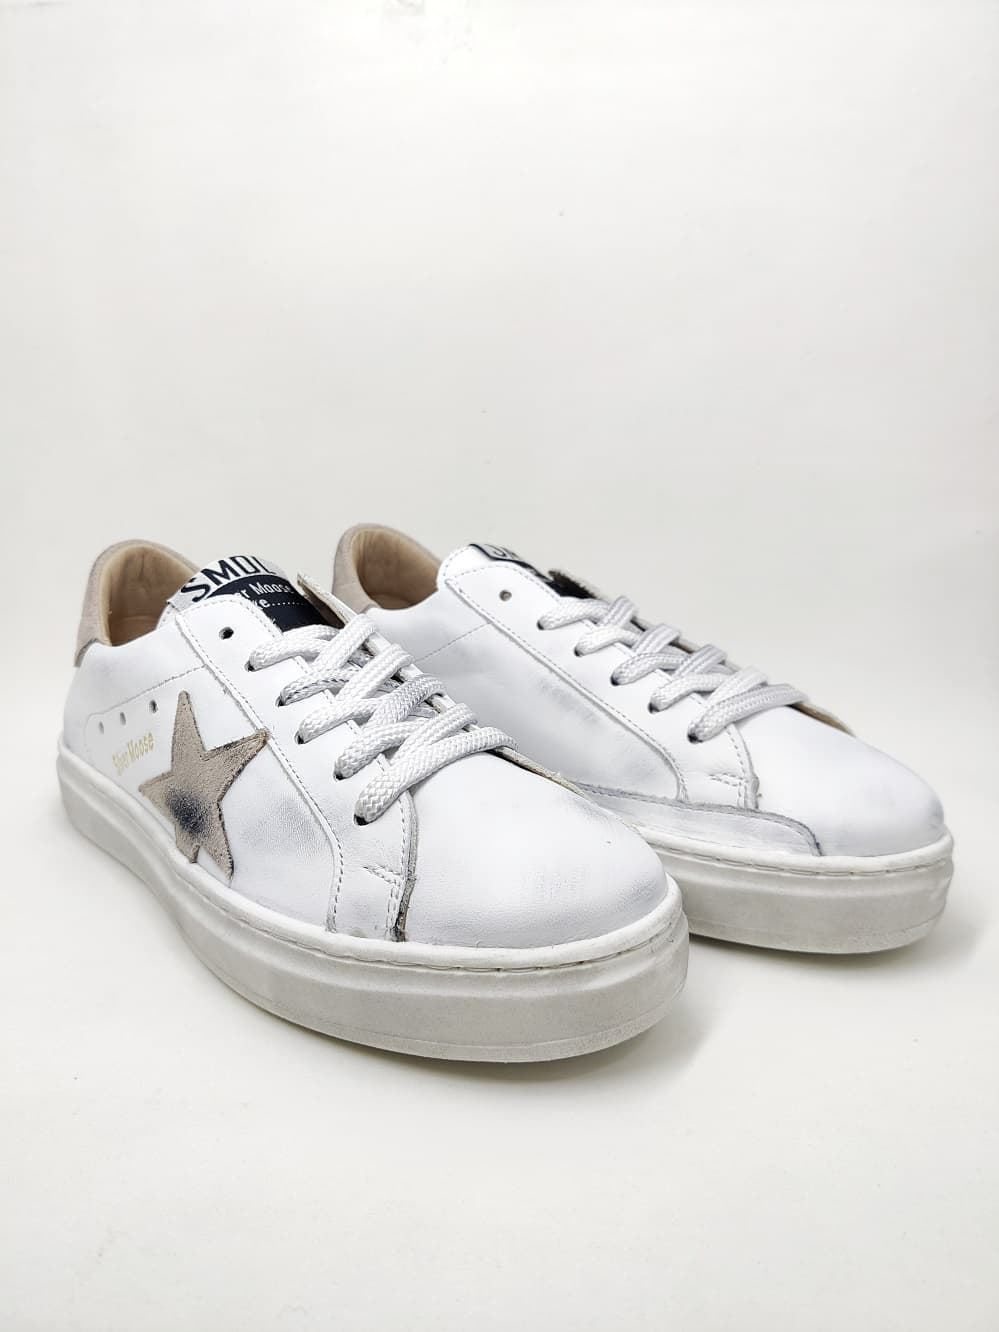 Golden Star sneakers in White Taupe leather - Image 4